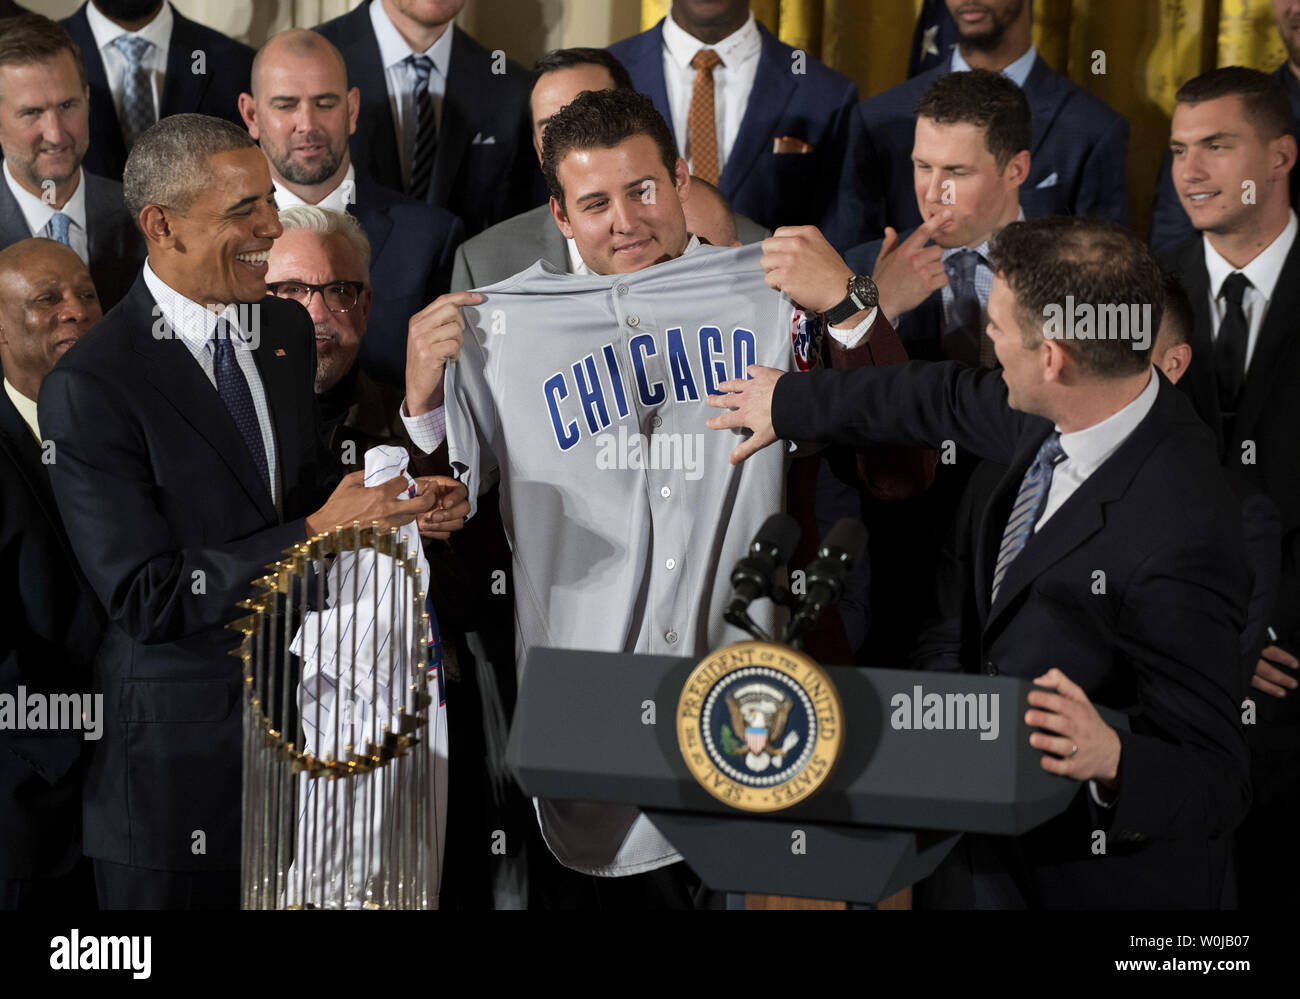 President Barack Obama smiles as Chicago Cubs first baseman Anthony Rizzo  and Chicago Cubs President of Baseball Operations Theo Epstein (R) present  him with a 'Chicago' Cubs away jersey during a ceremony